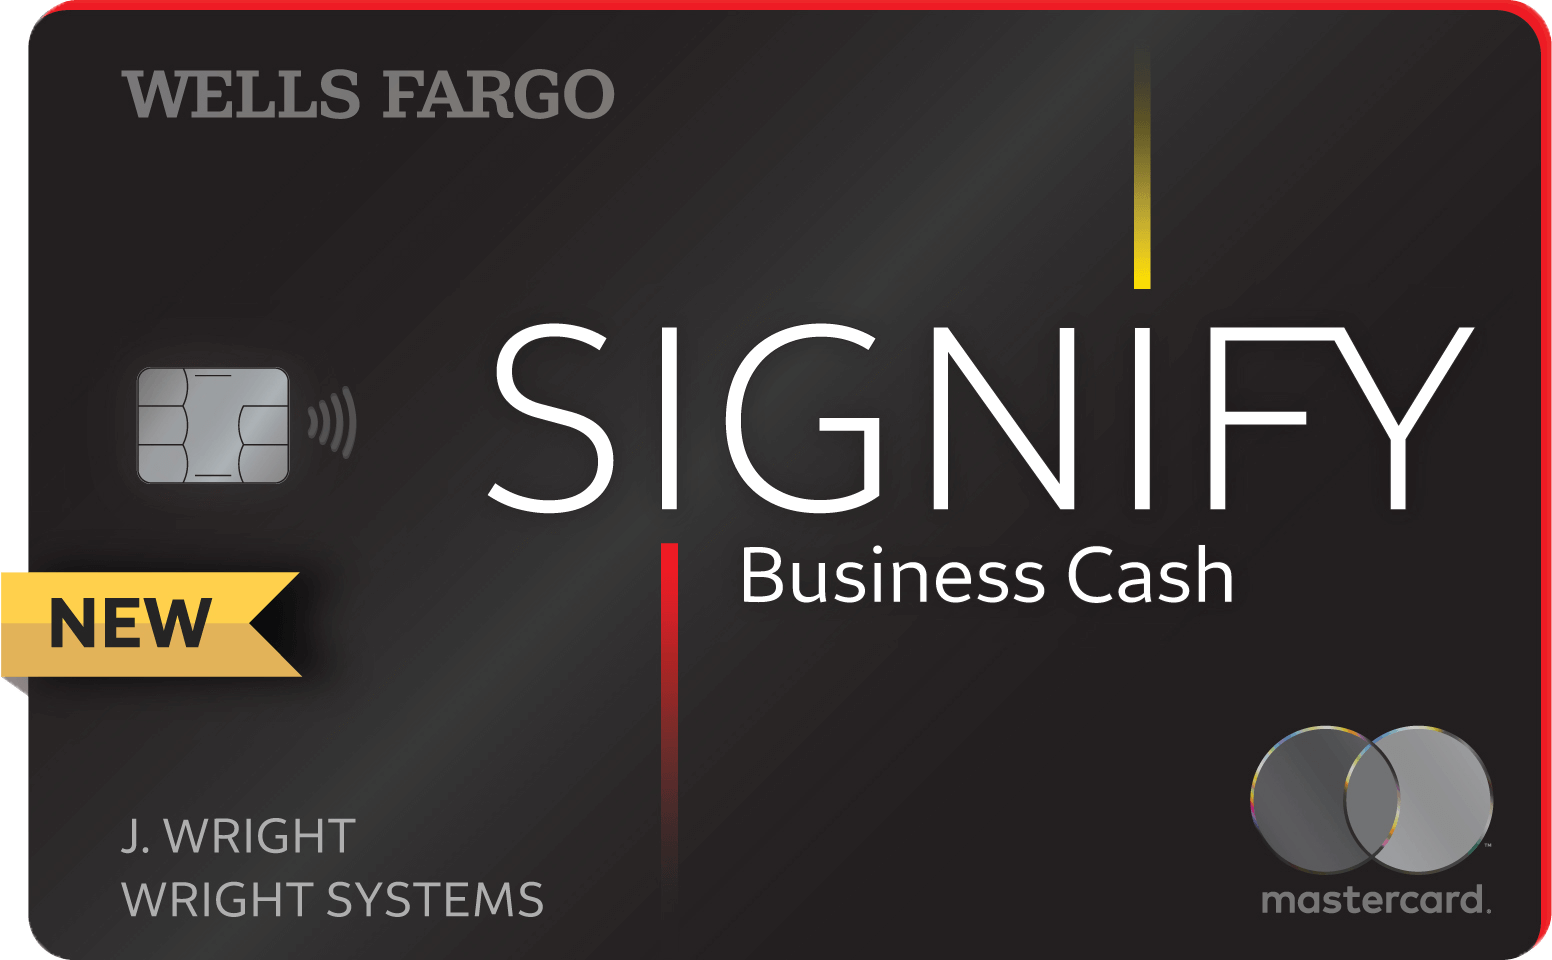 Wells Fargo Signify Business Cash℠ Card with chip and contactless tap to pay technology. Opens in the same window.